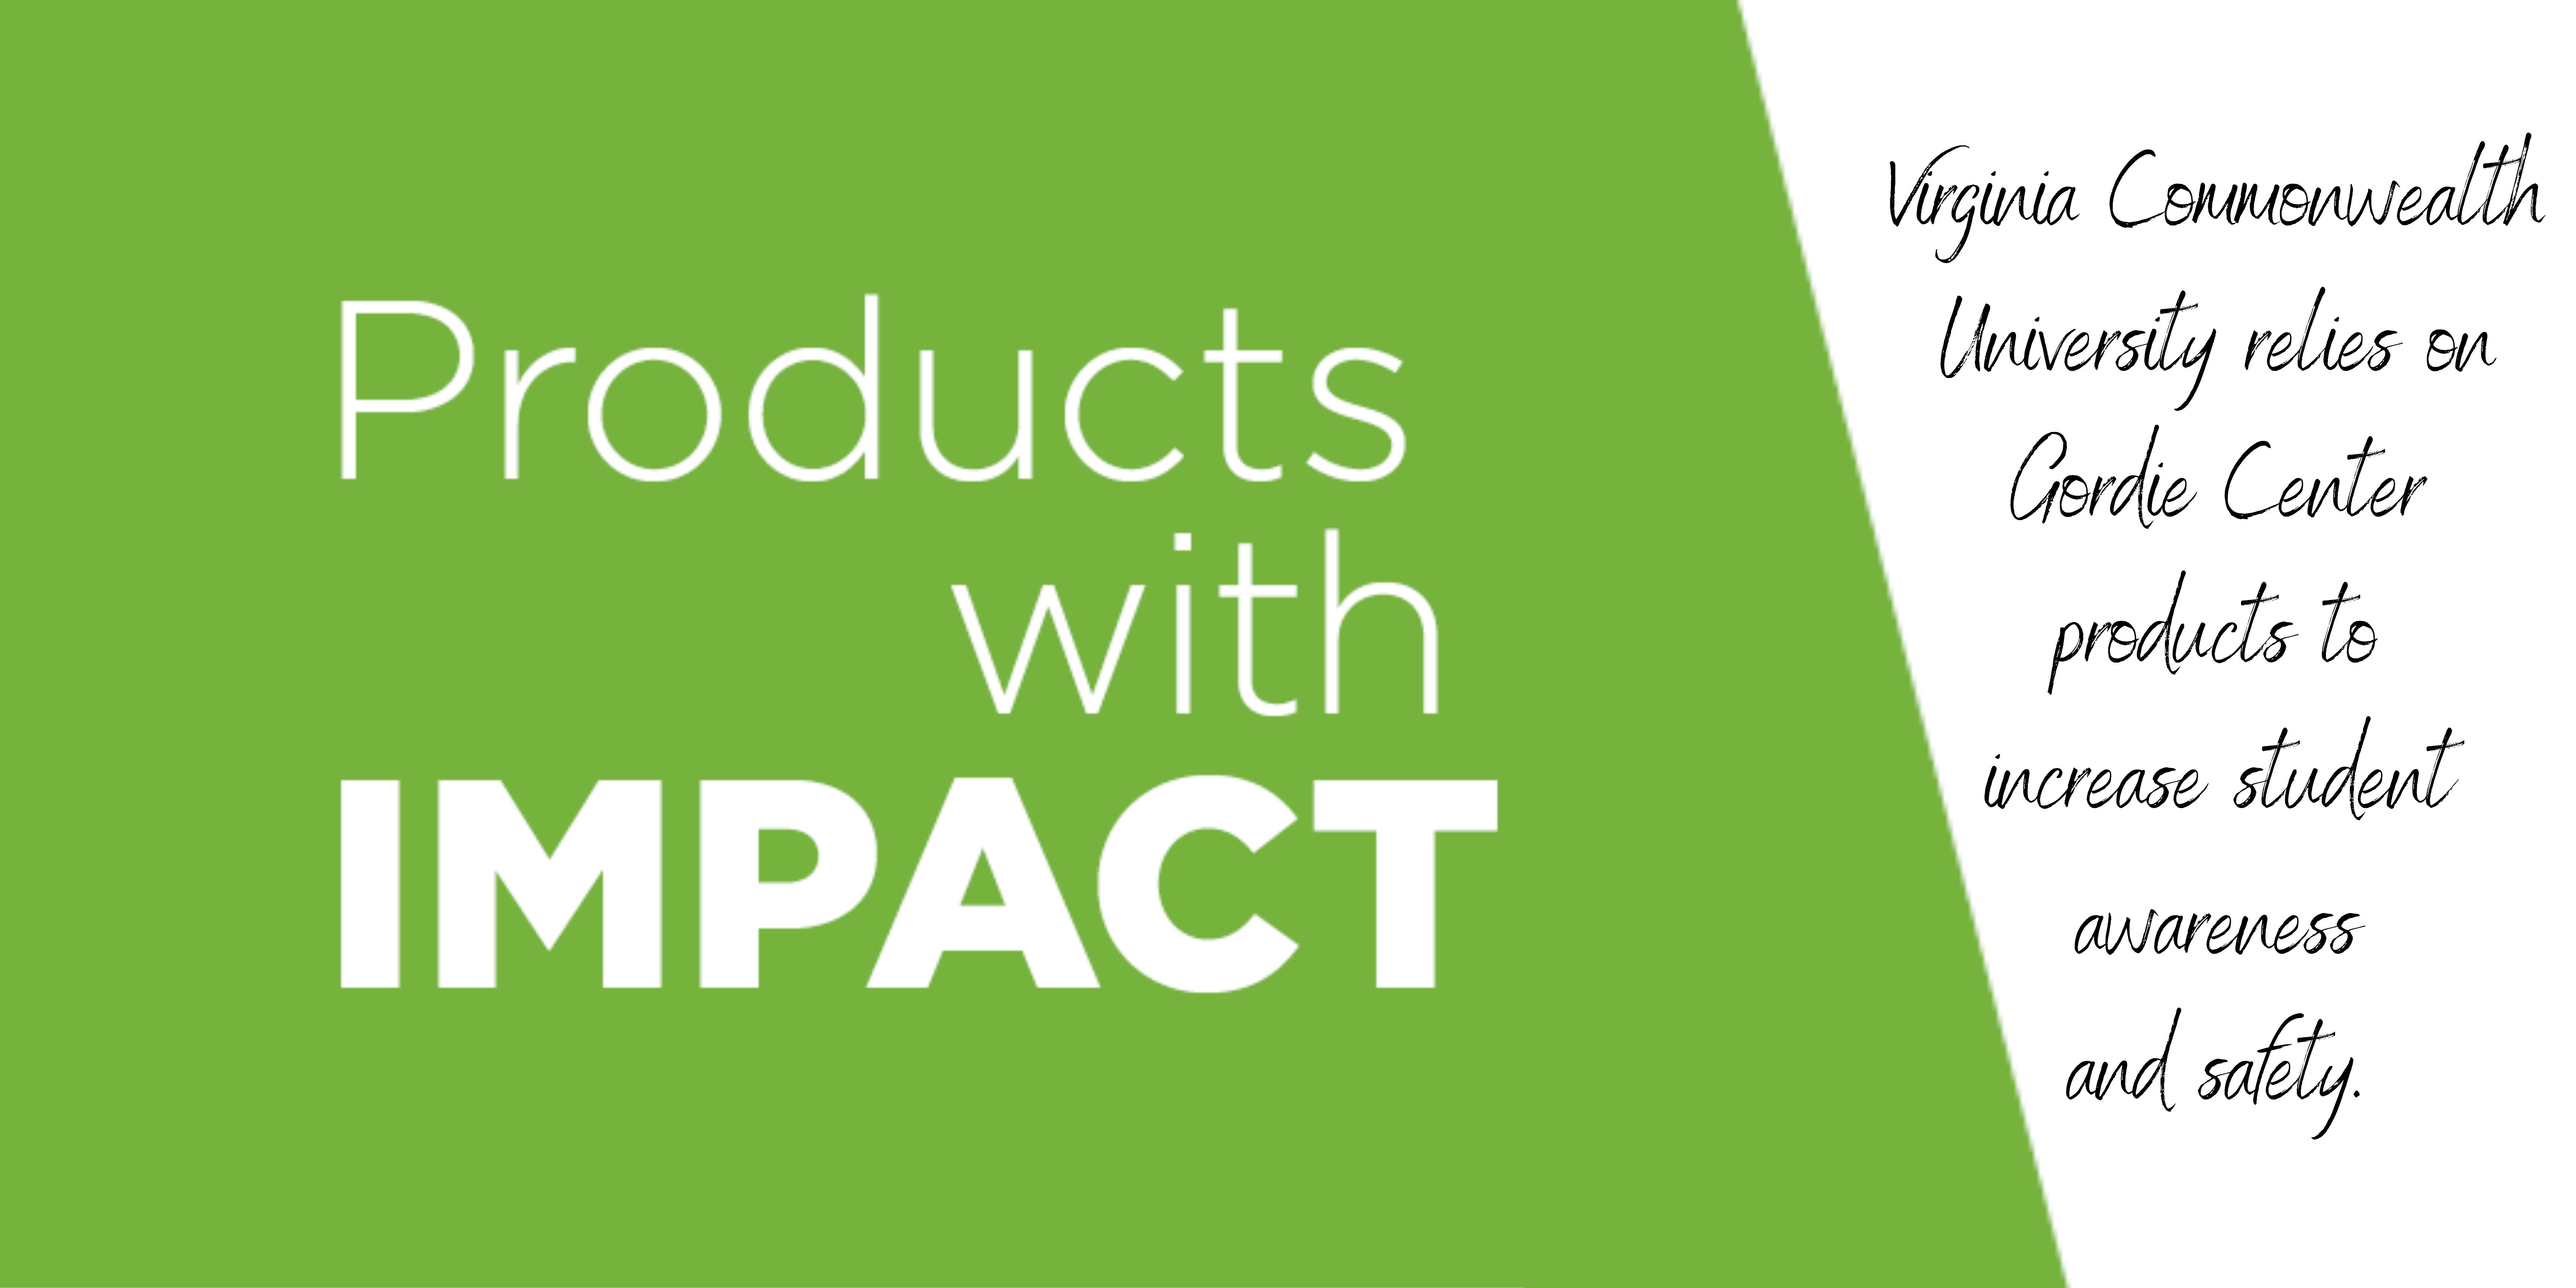 Products with impact VCU banner